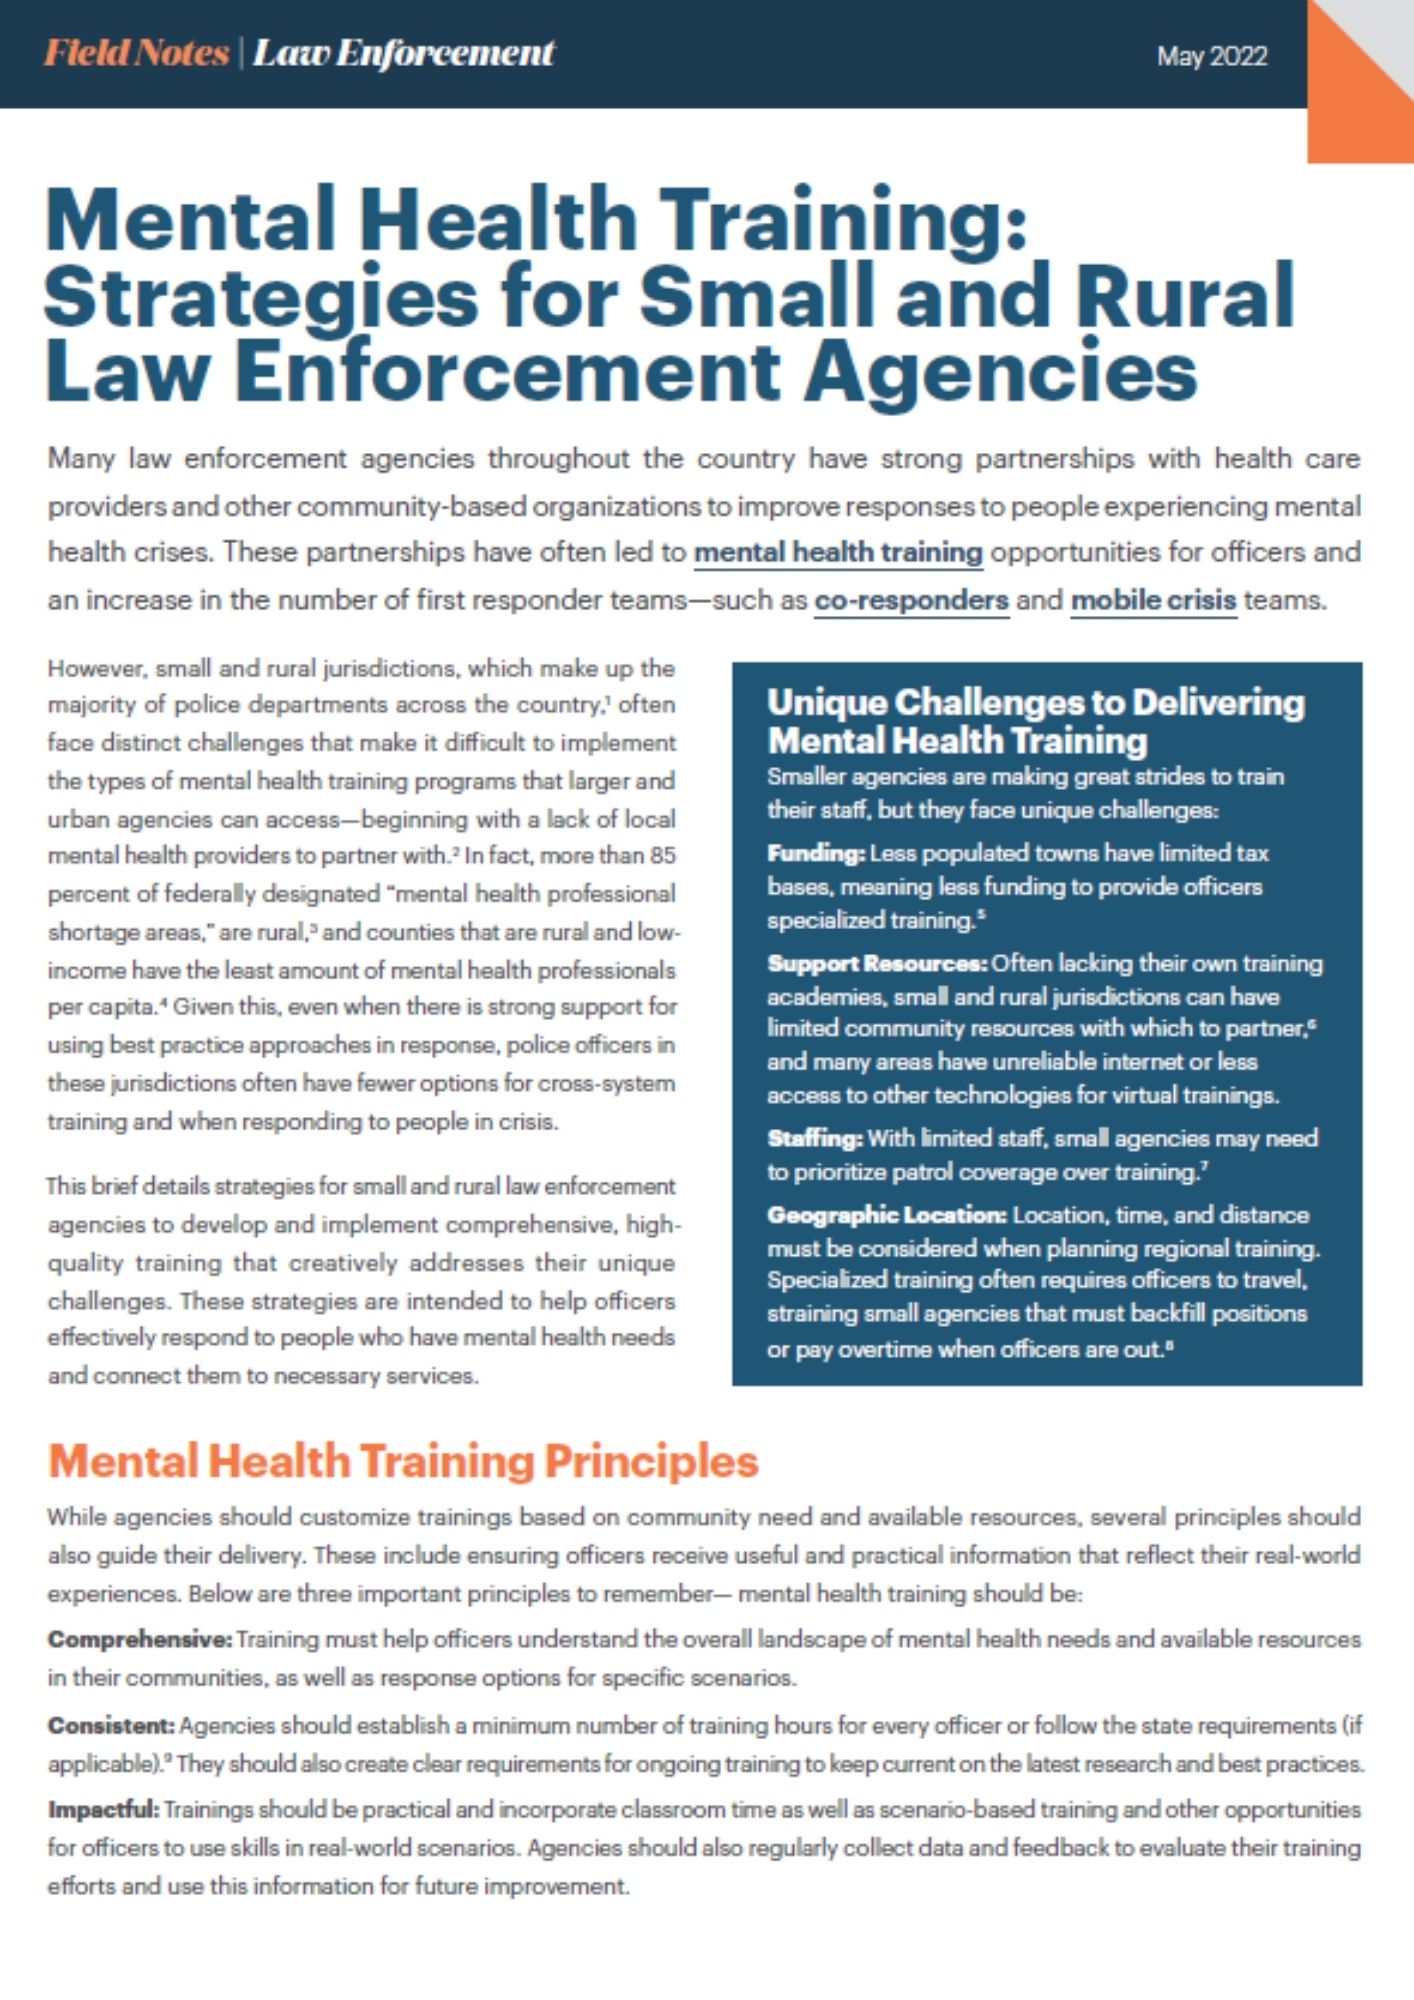 Mental Health in Public Safety: Addressing the Unseen Risks